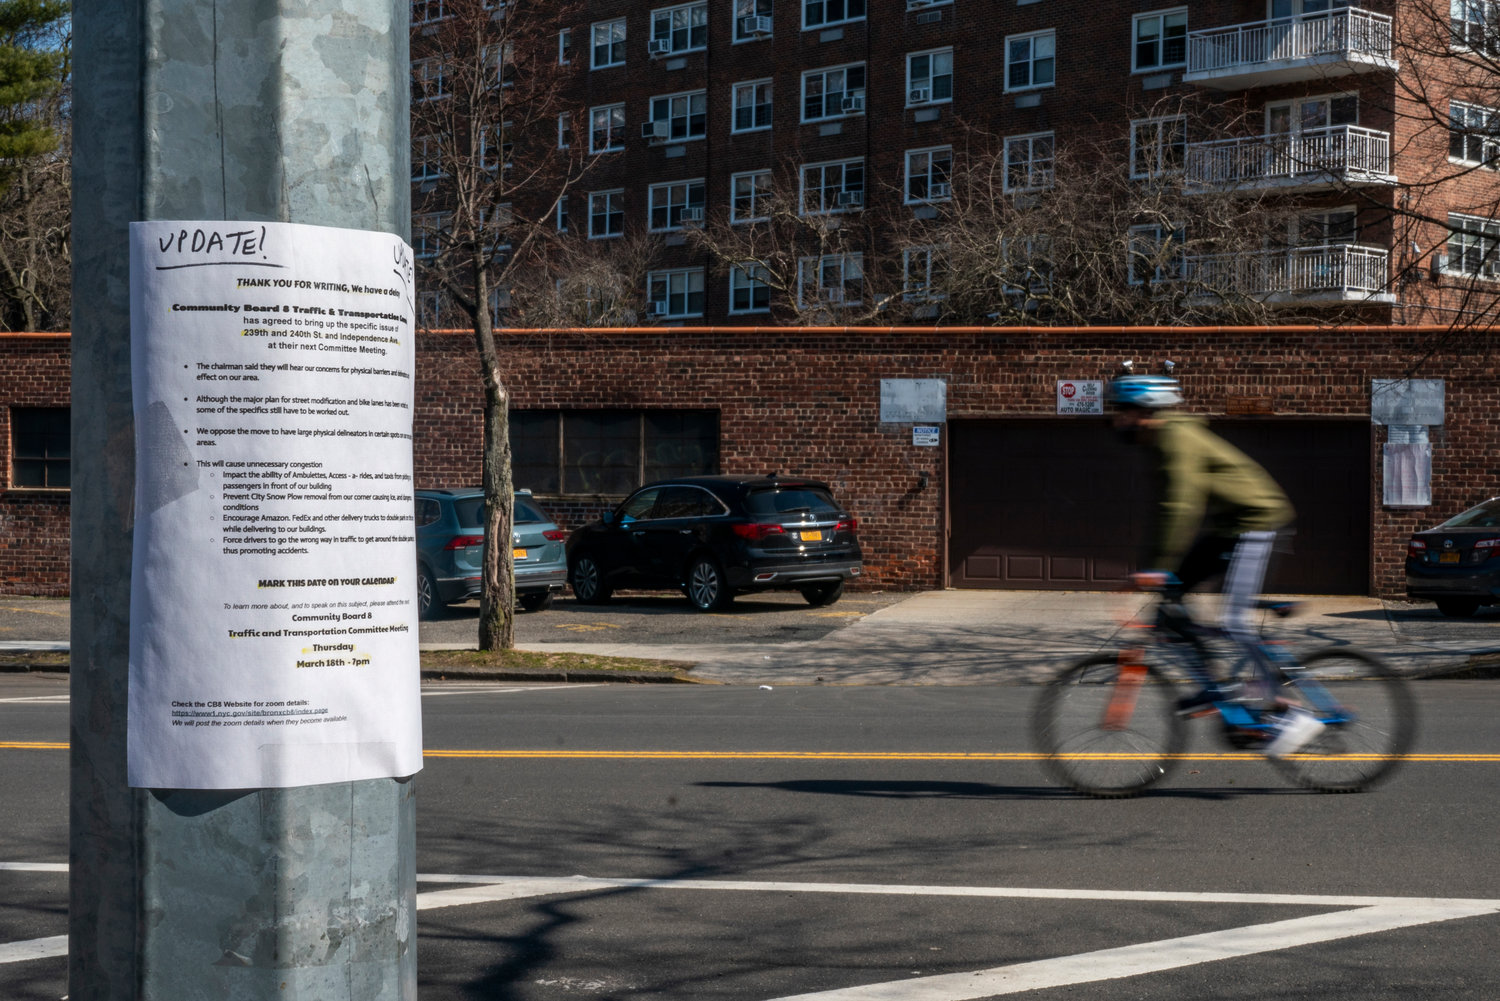 It looked as though Community Board 8’s traffic and transportation committee was finally getting somewhere developing recommendations to curb reckless driving along Independence Avenue. But random flyers anonymously posted in the neighborhood criticizing details of the process has forced the committee to start back almost at square one.